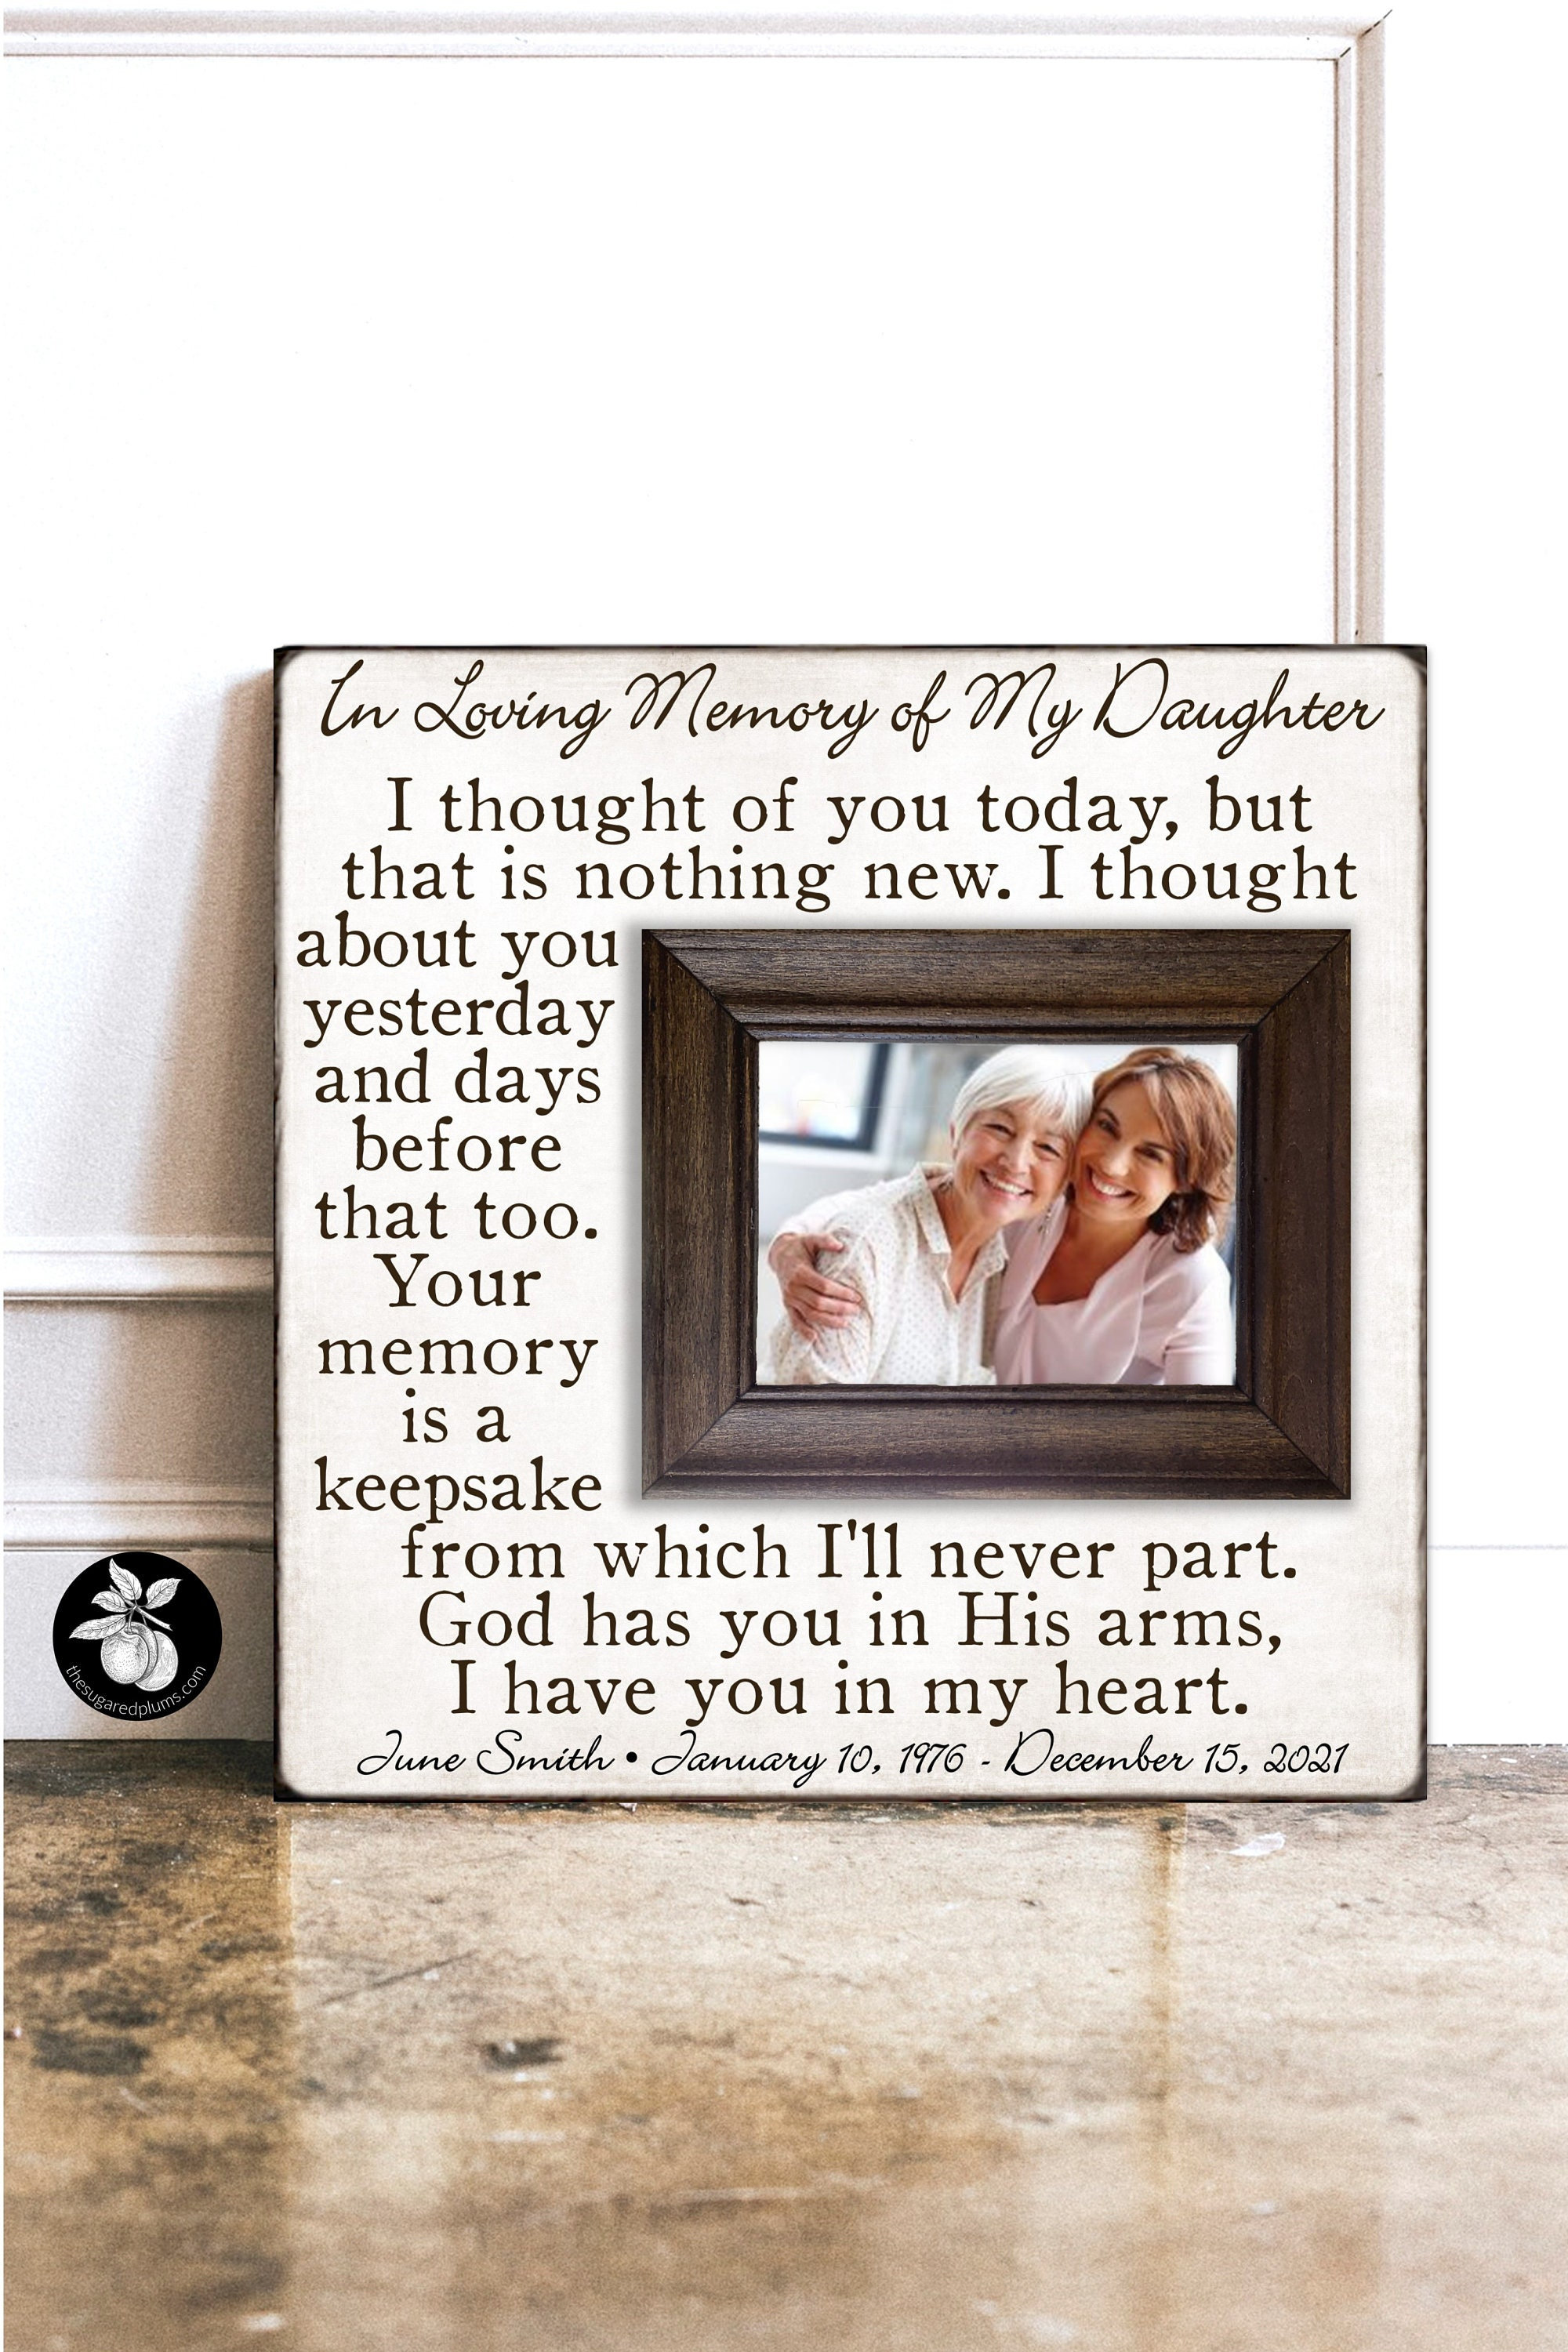 Photo holder clip sign, 4x6” photo frame with quote